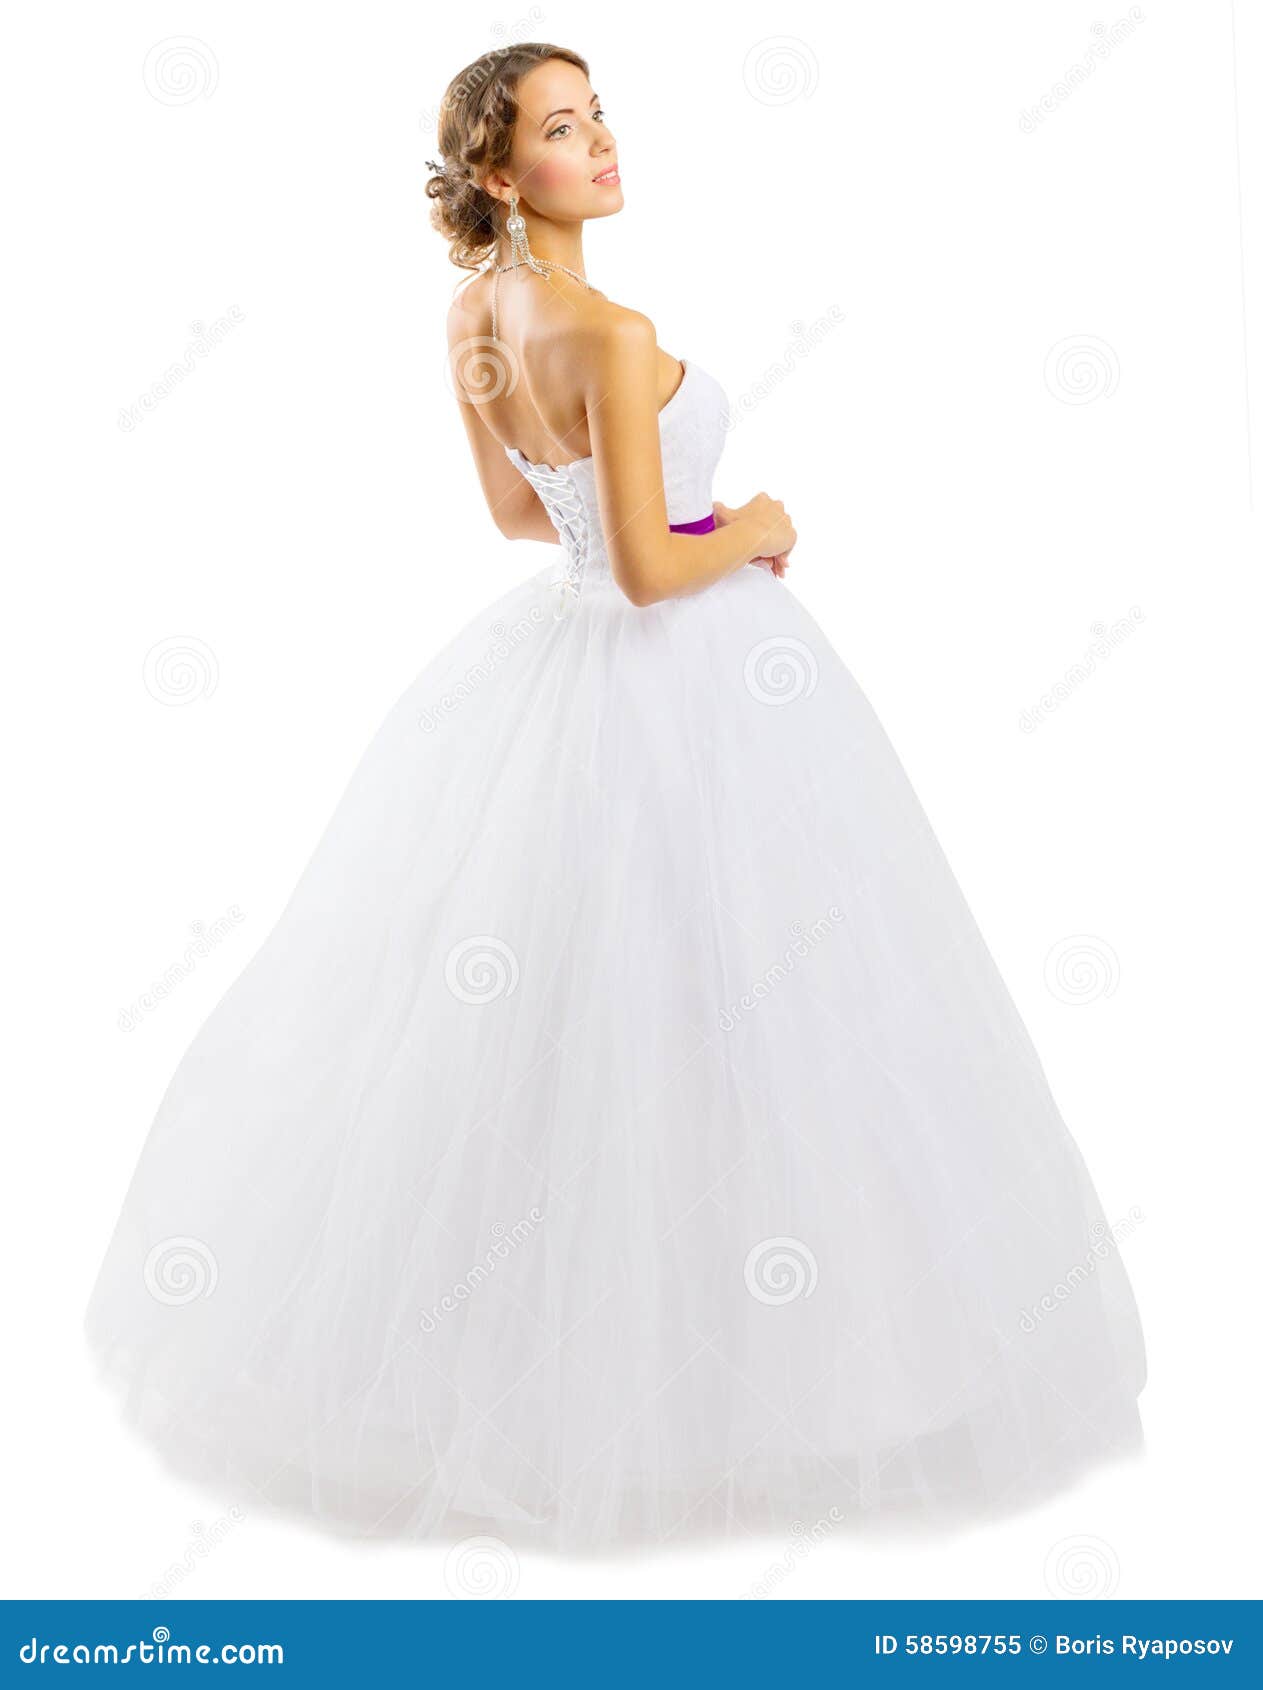 Young girl in white dress stock image. Image of evening - 58598755